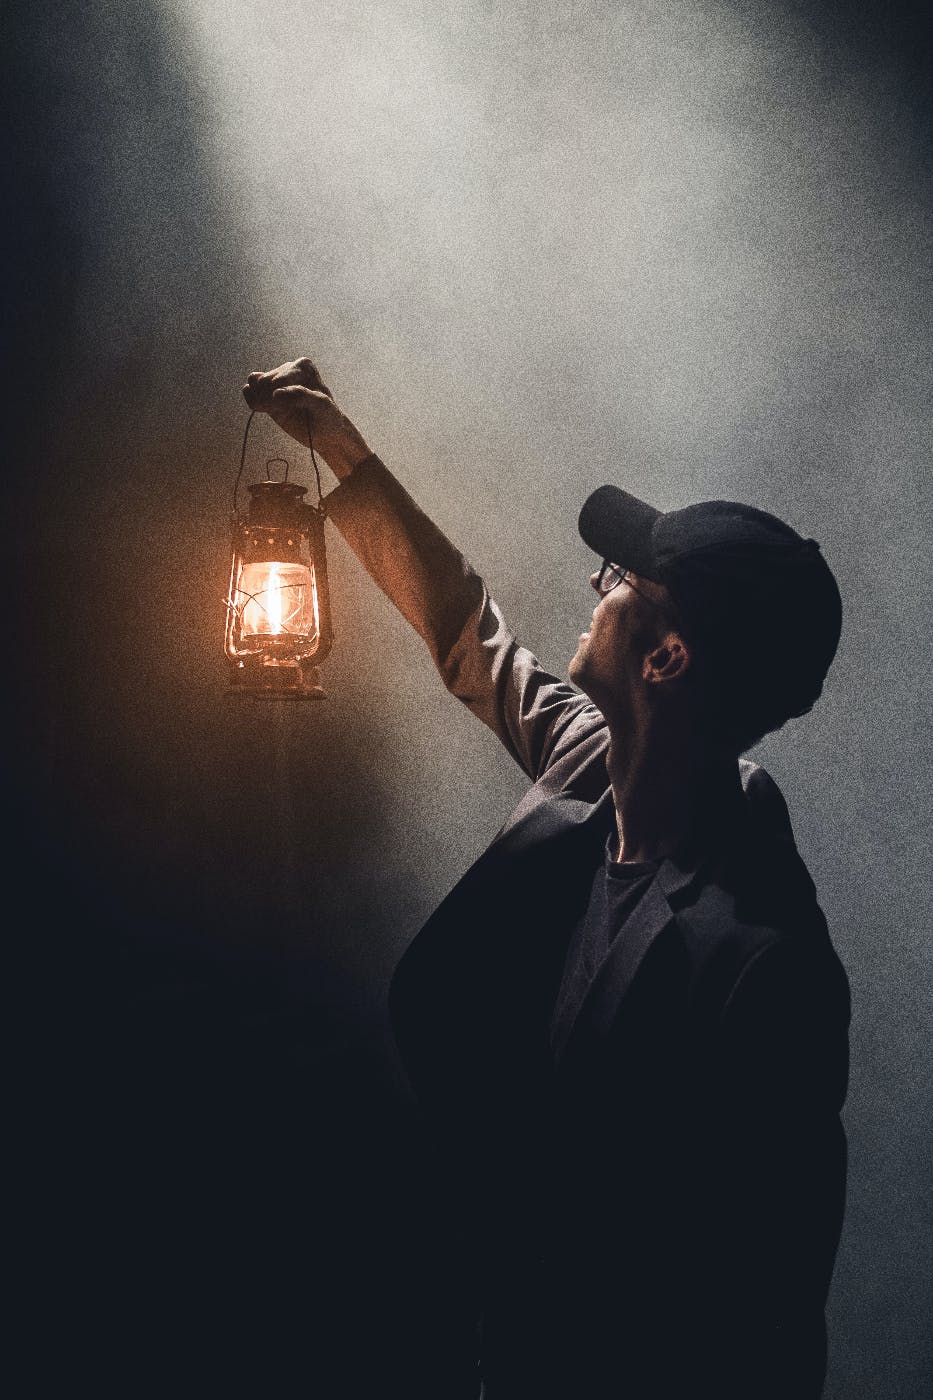 A man with a baseball cap in a beam of dusty light holding up a lantern